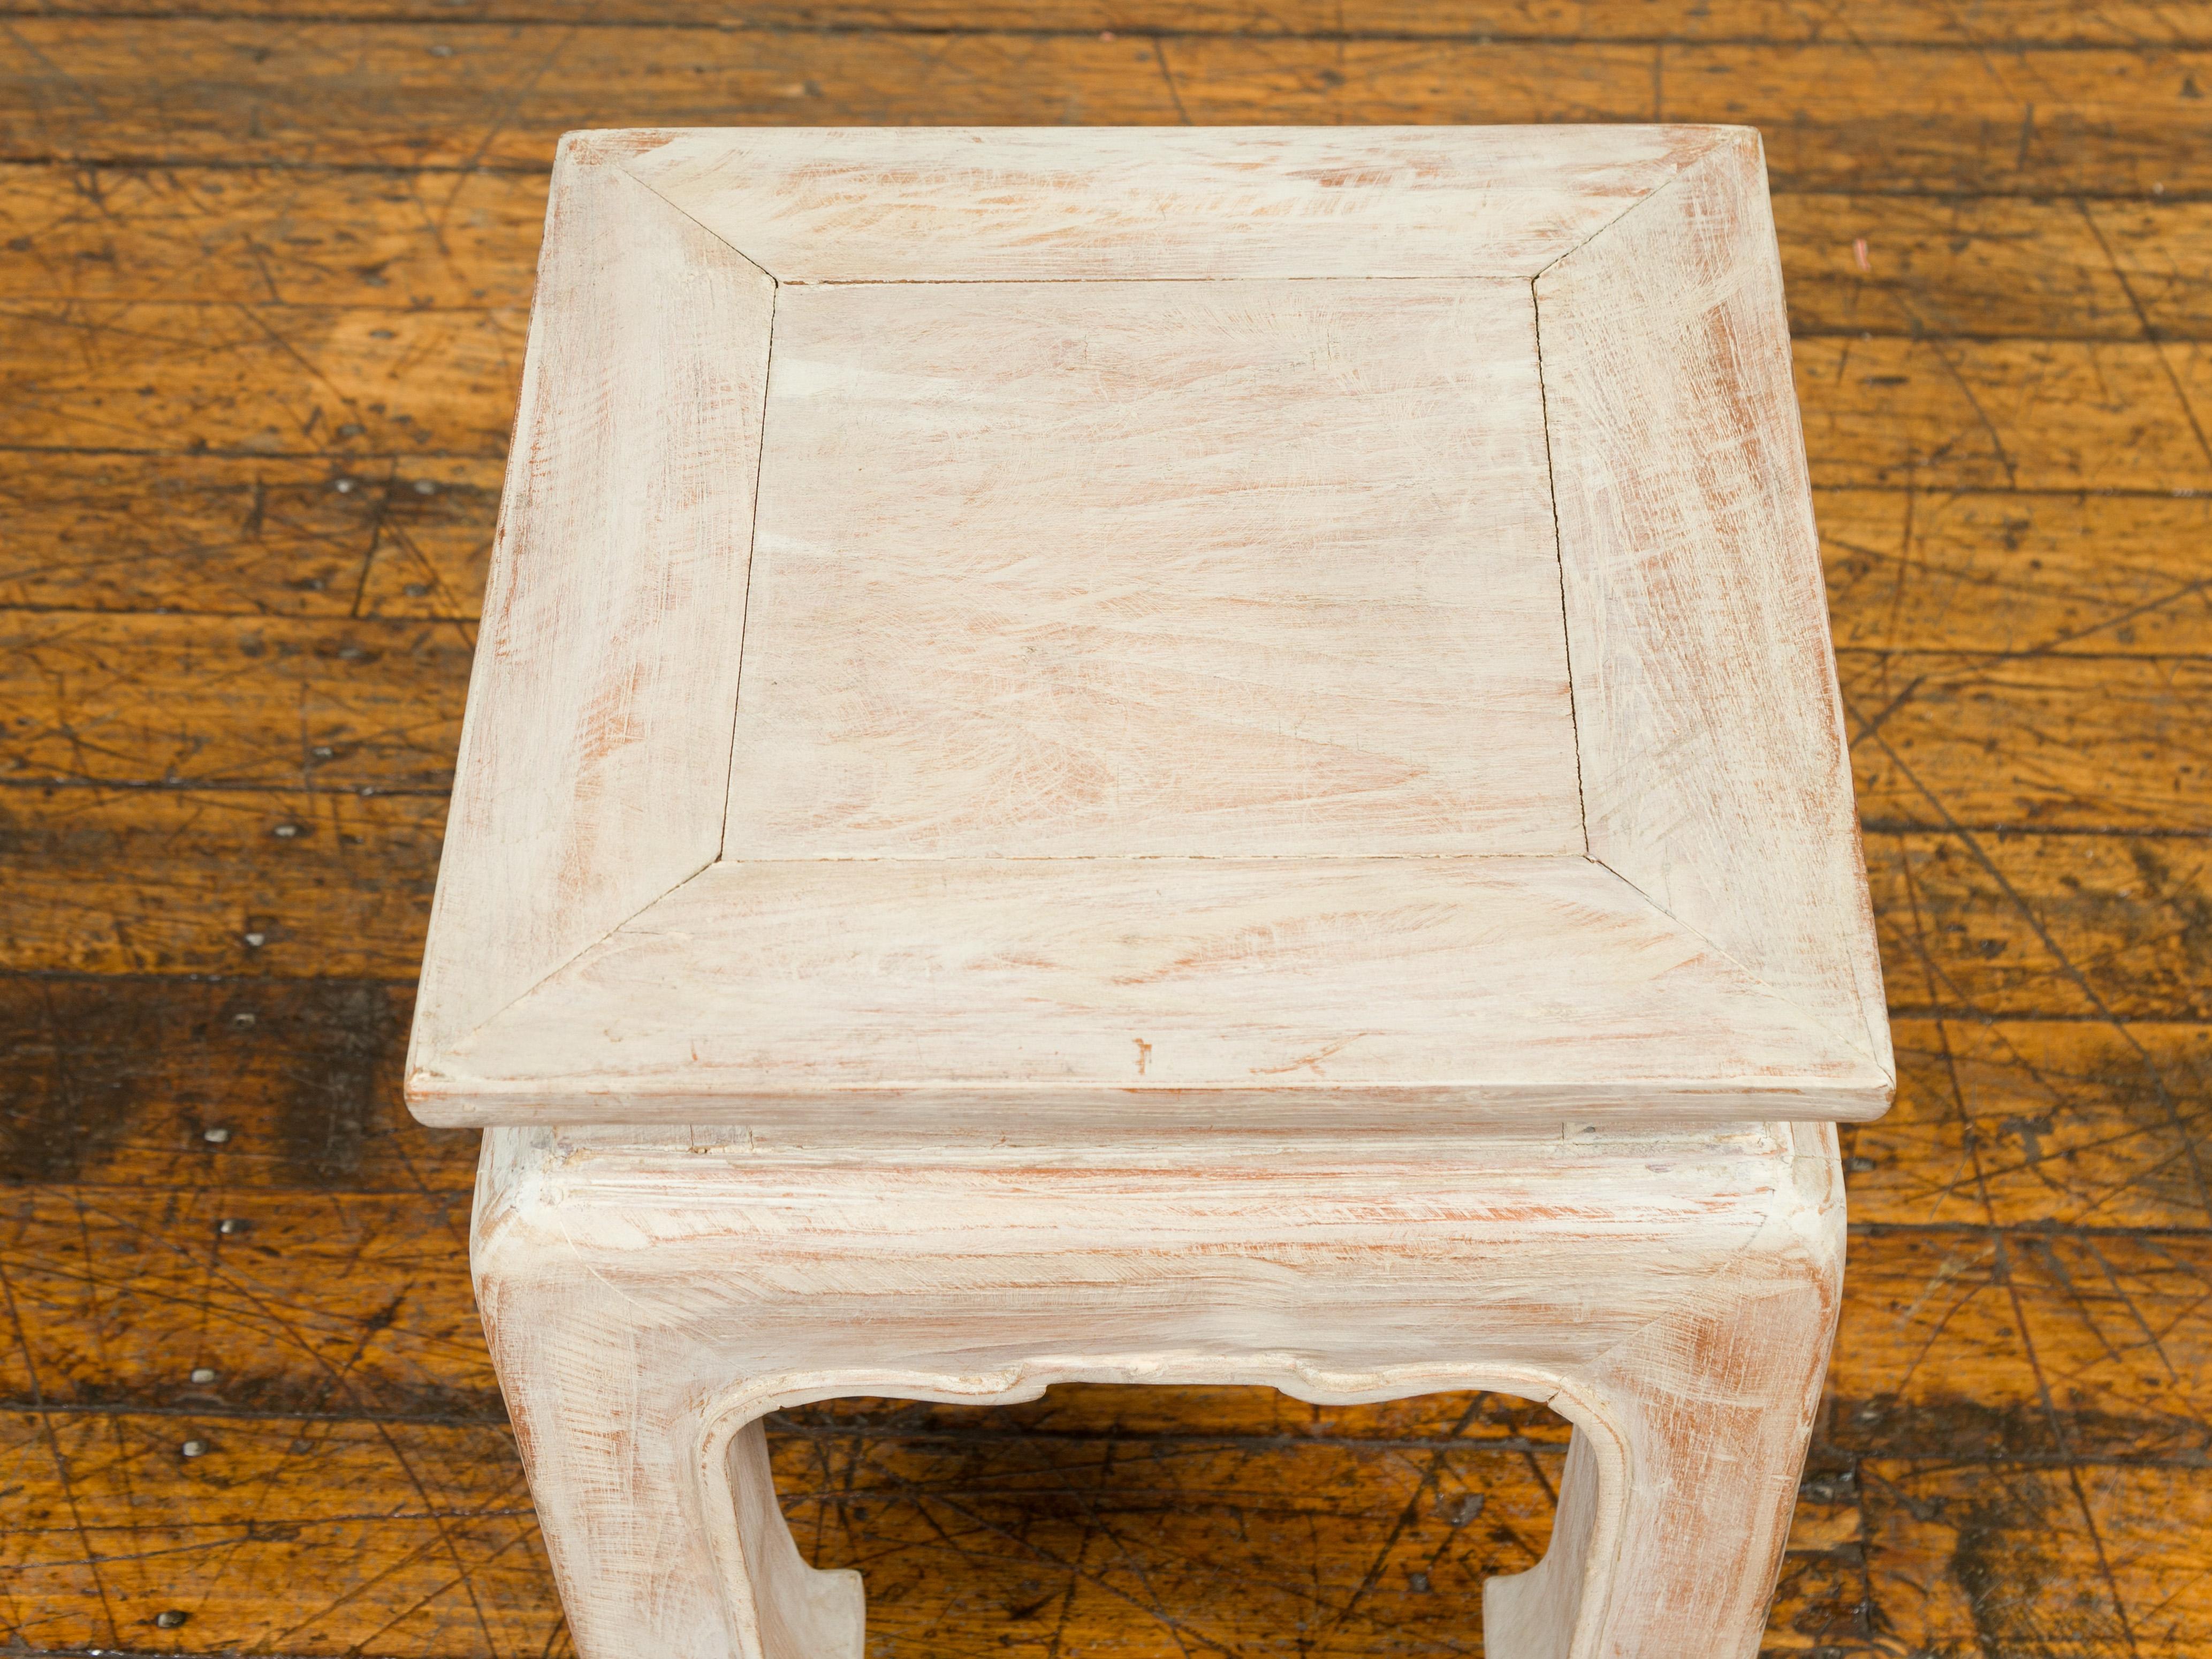 Contemporary Teak Ming Style Waisted Stool with Chow Legs and Distressed Finish For Sale 1